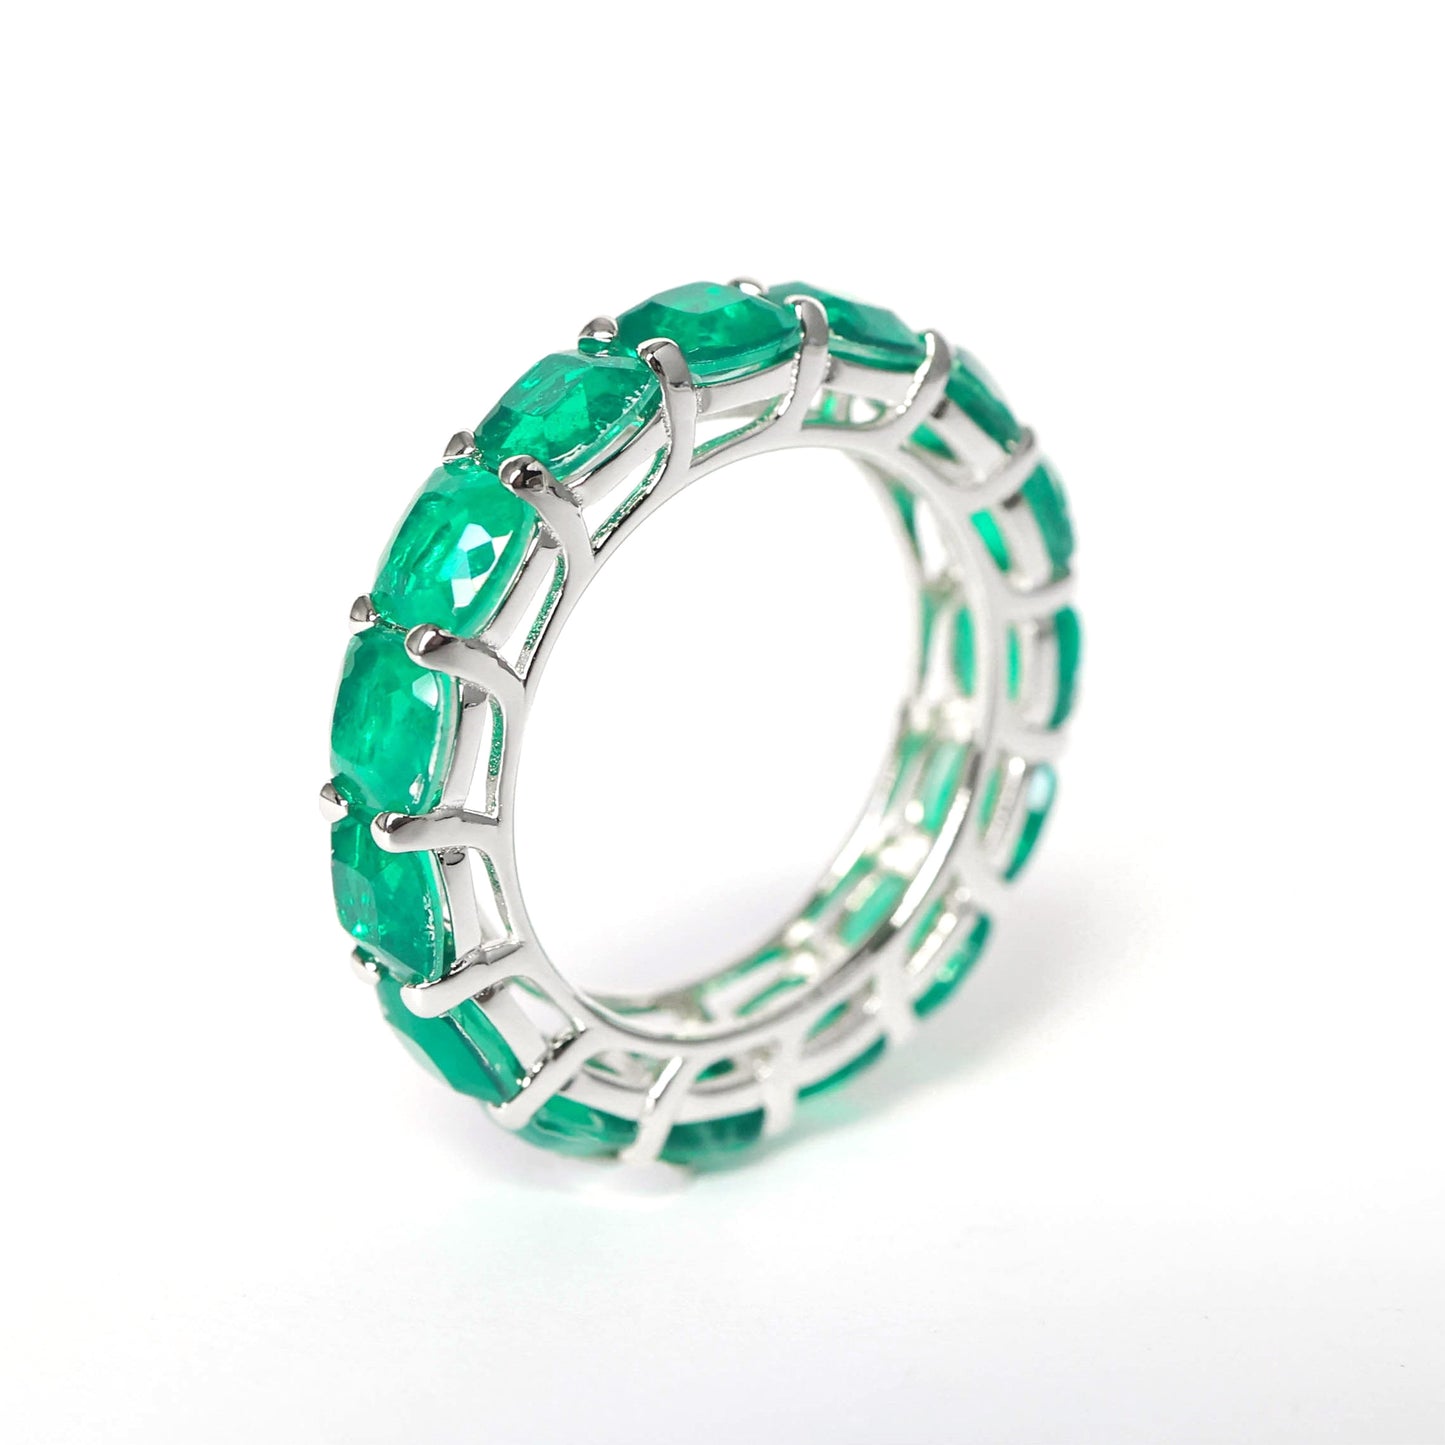 Customized design Micro-setting Emerald color Lab created stones detailed band ring, sterling silver